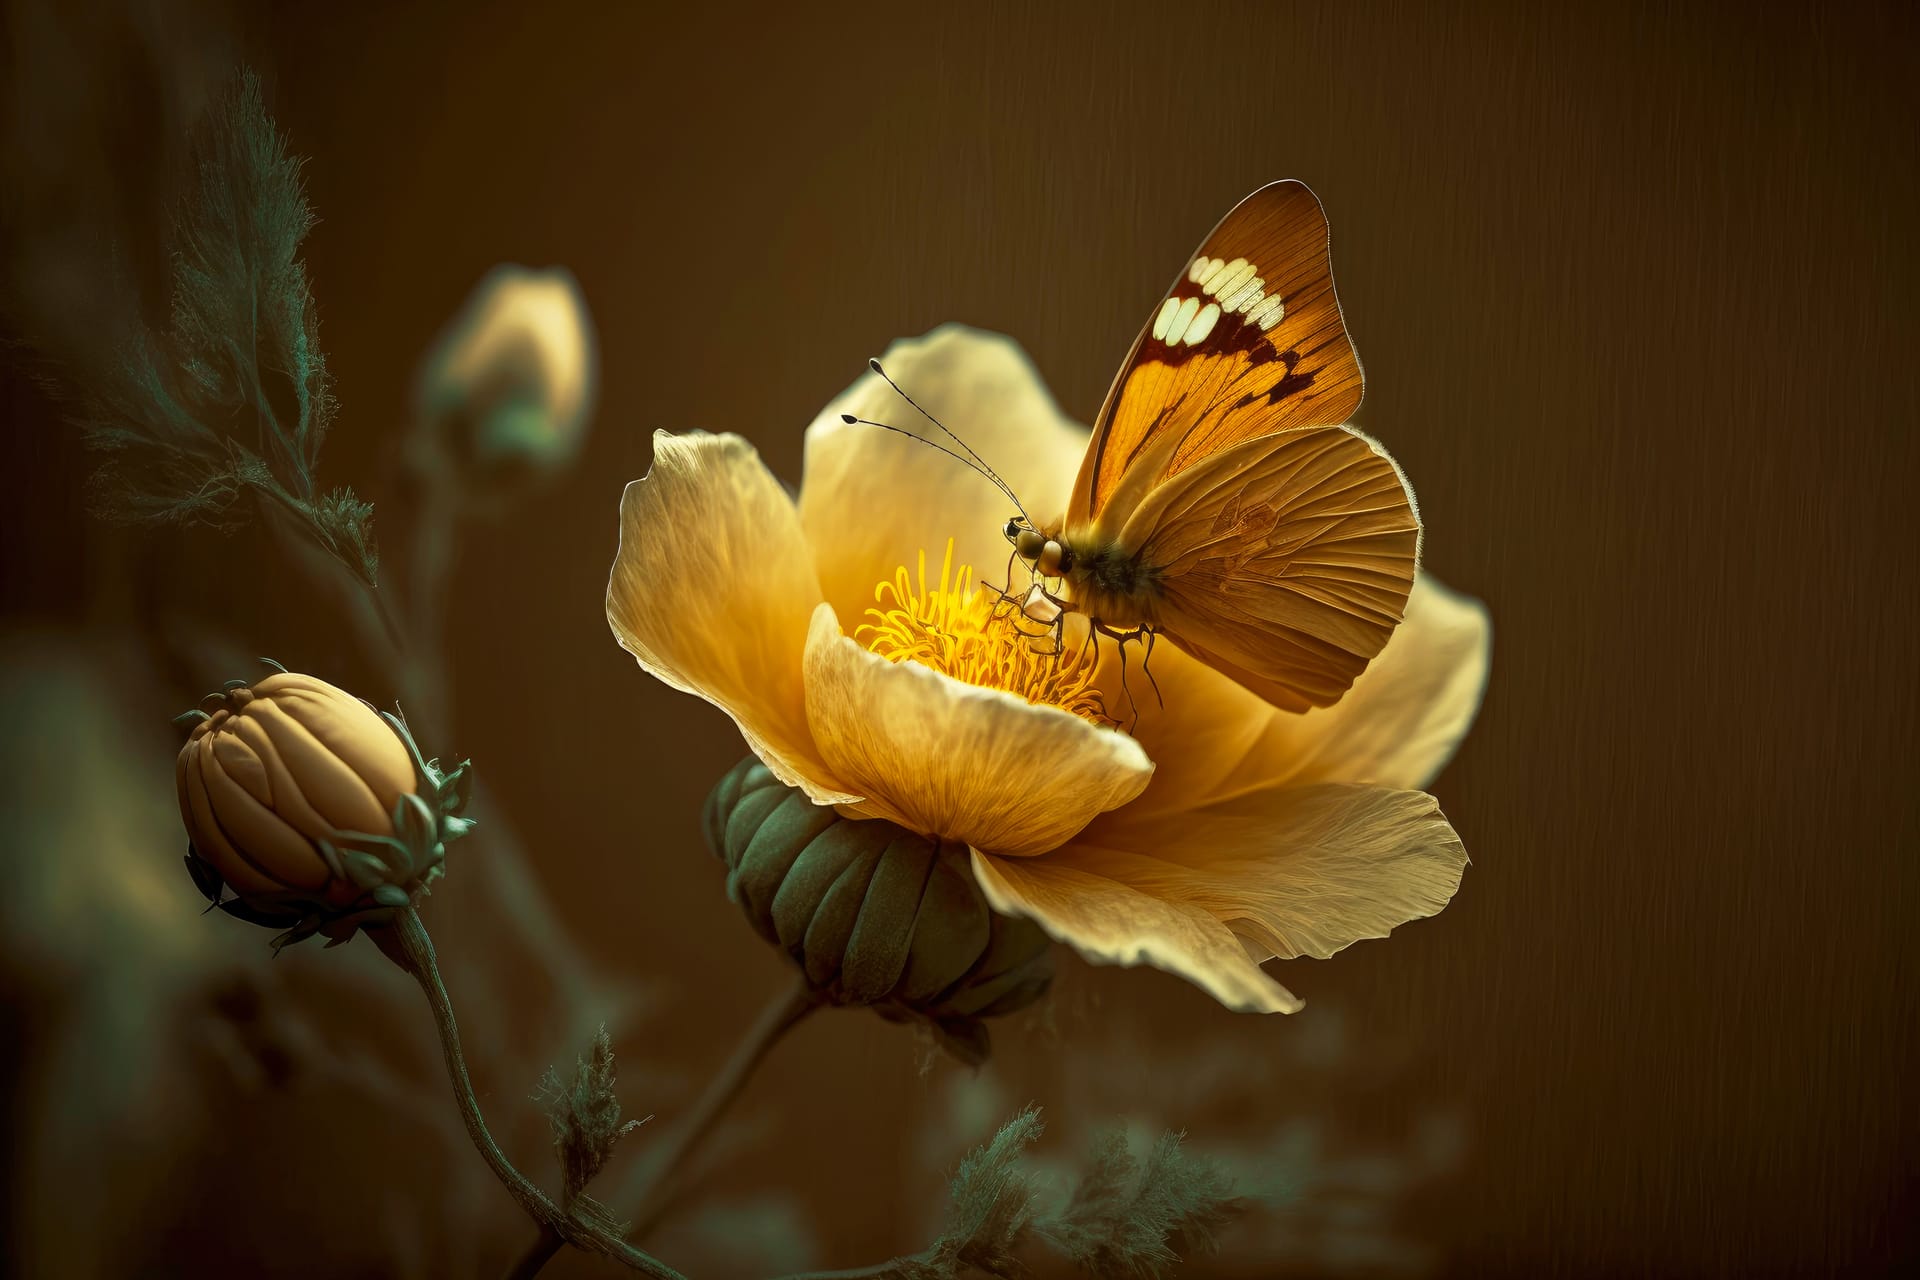 Yellow flower with bud blurred brown background with butterfly image